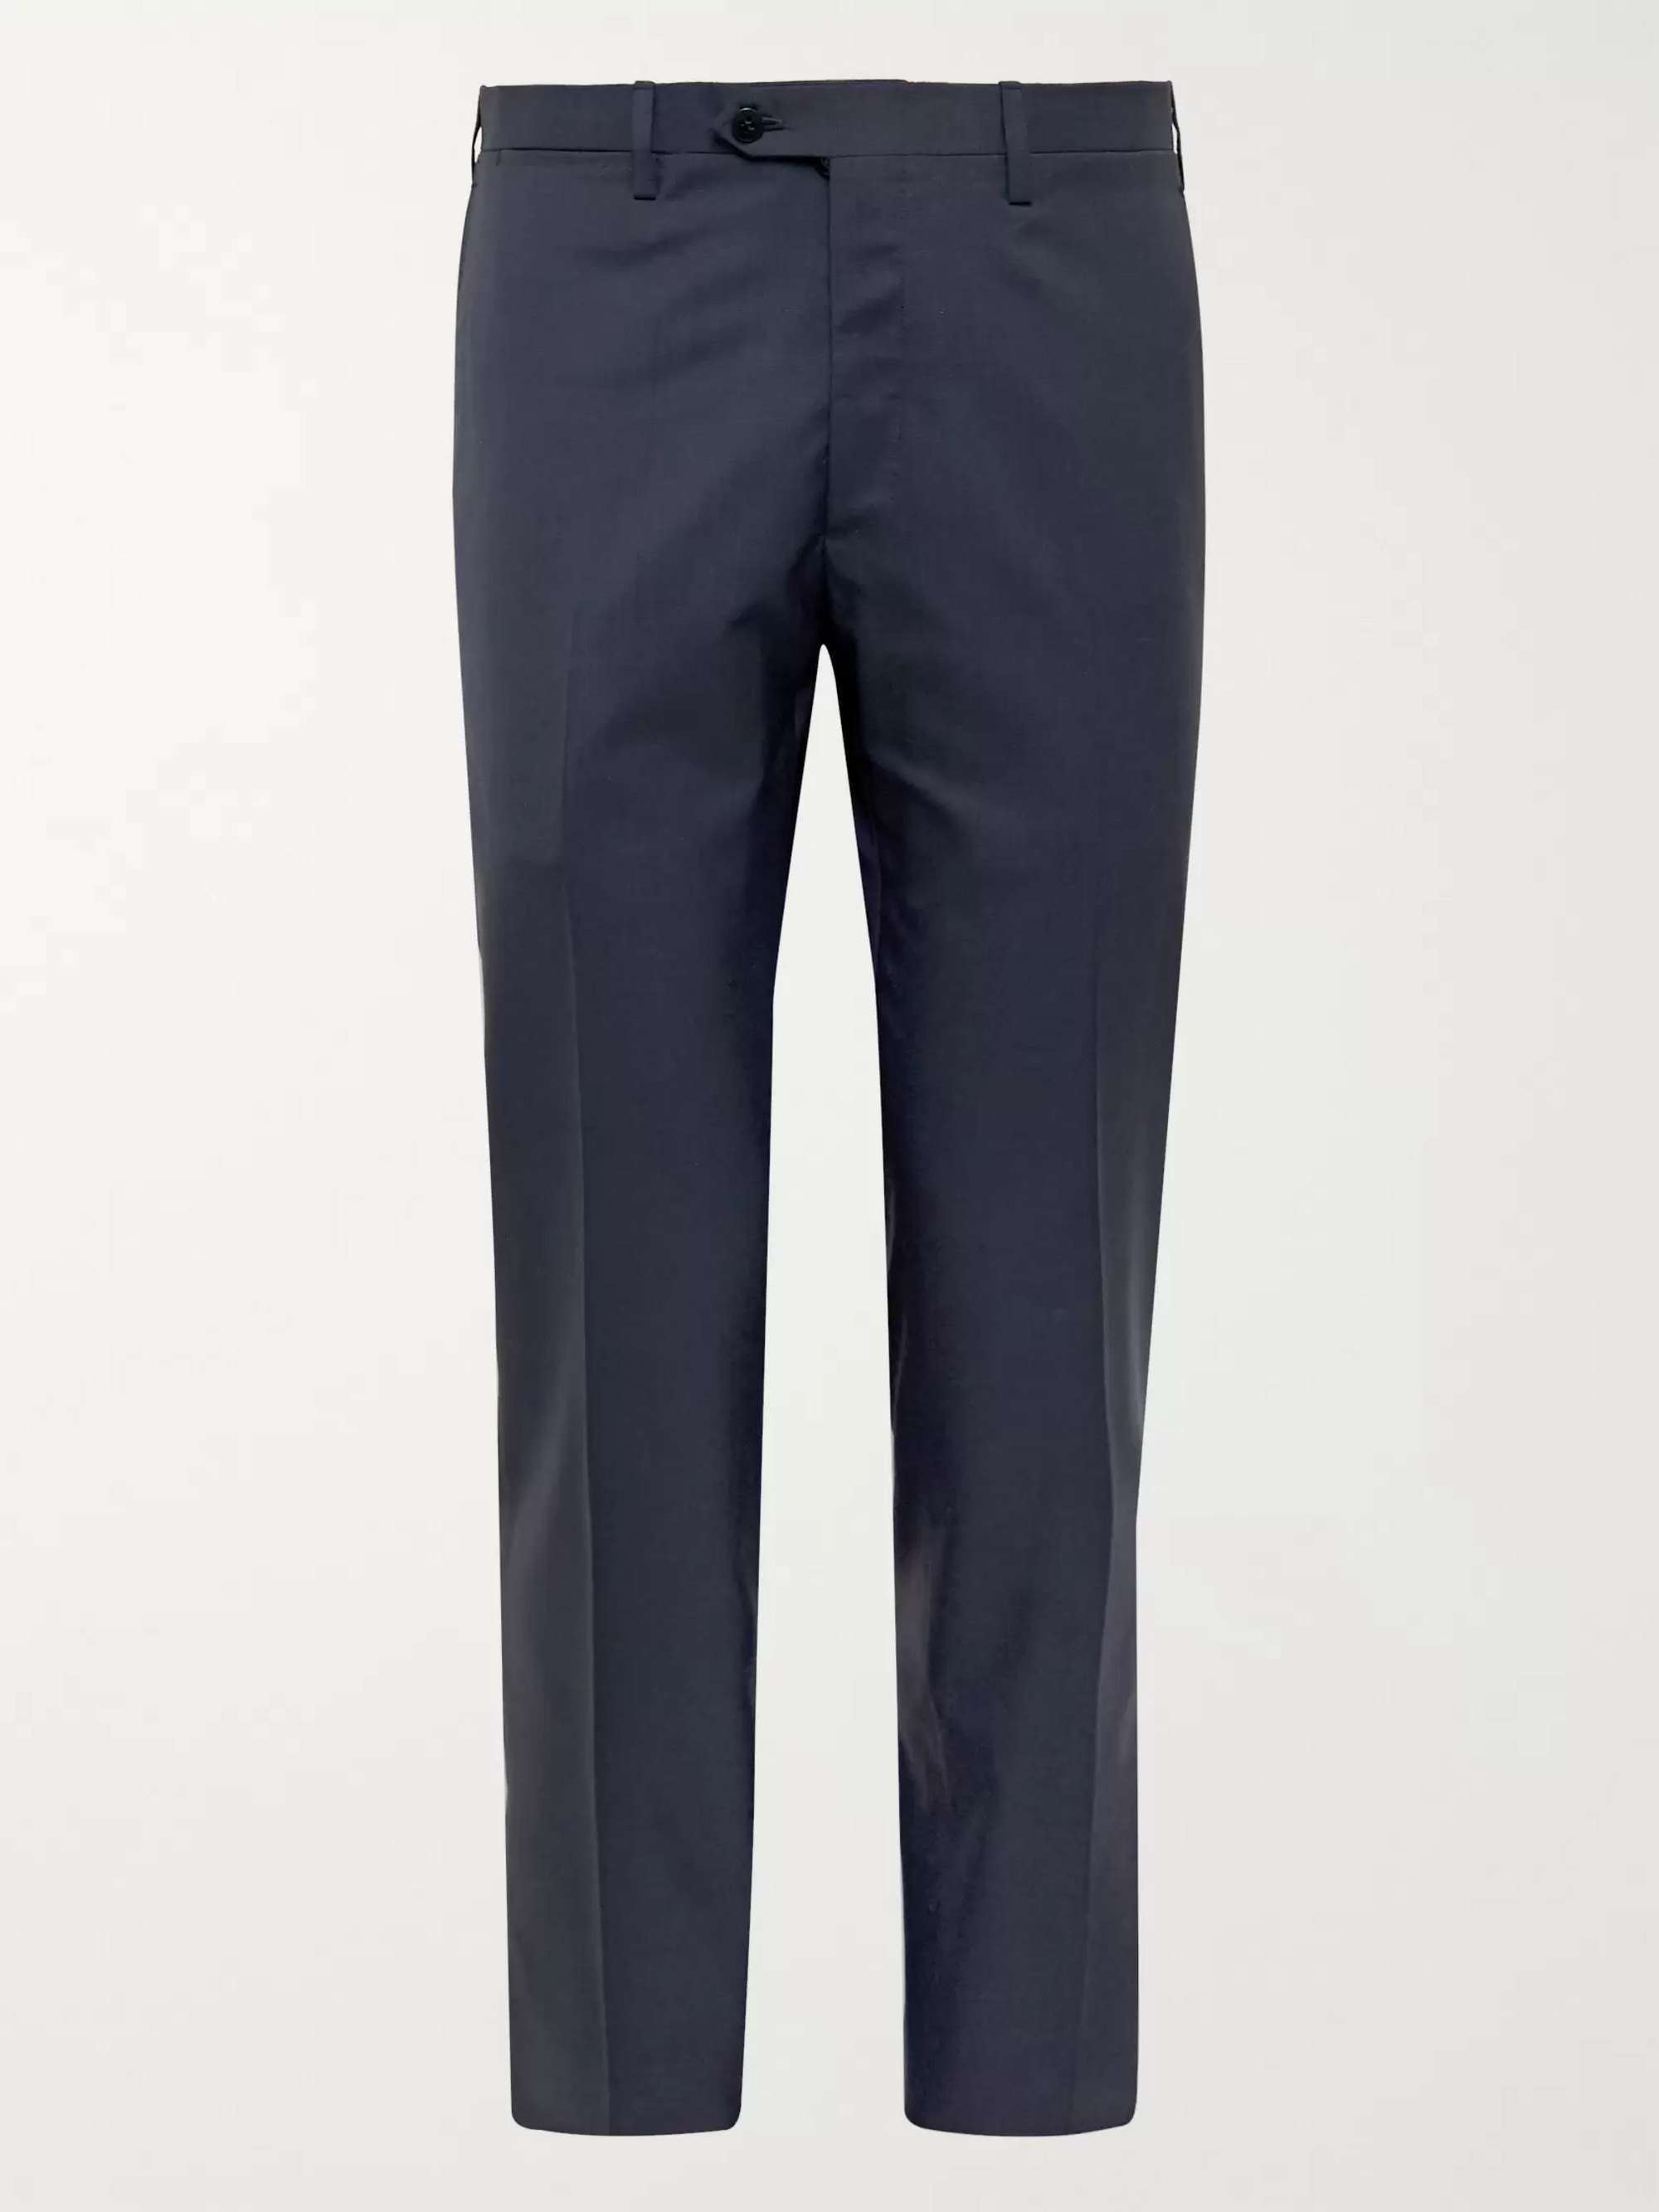 KITON Slim-Fit Puppytooth Cashmere Suit Trousers